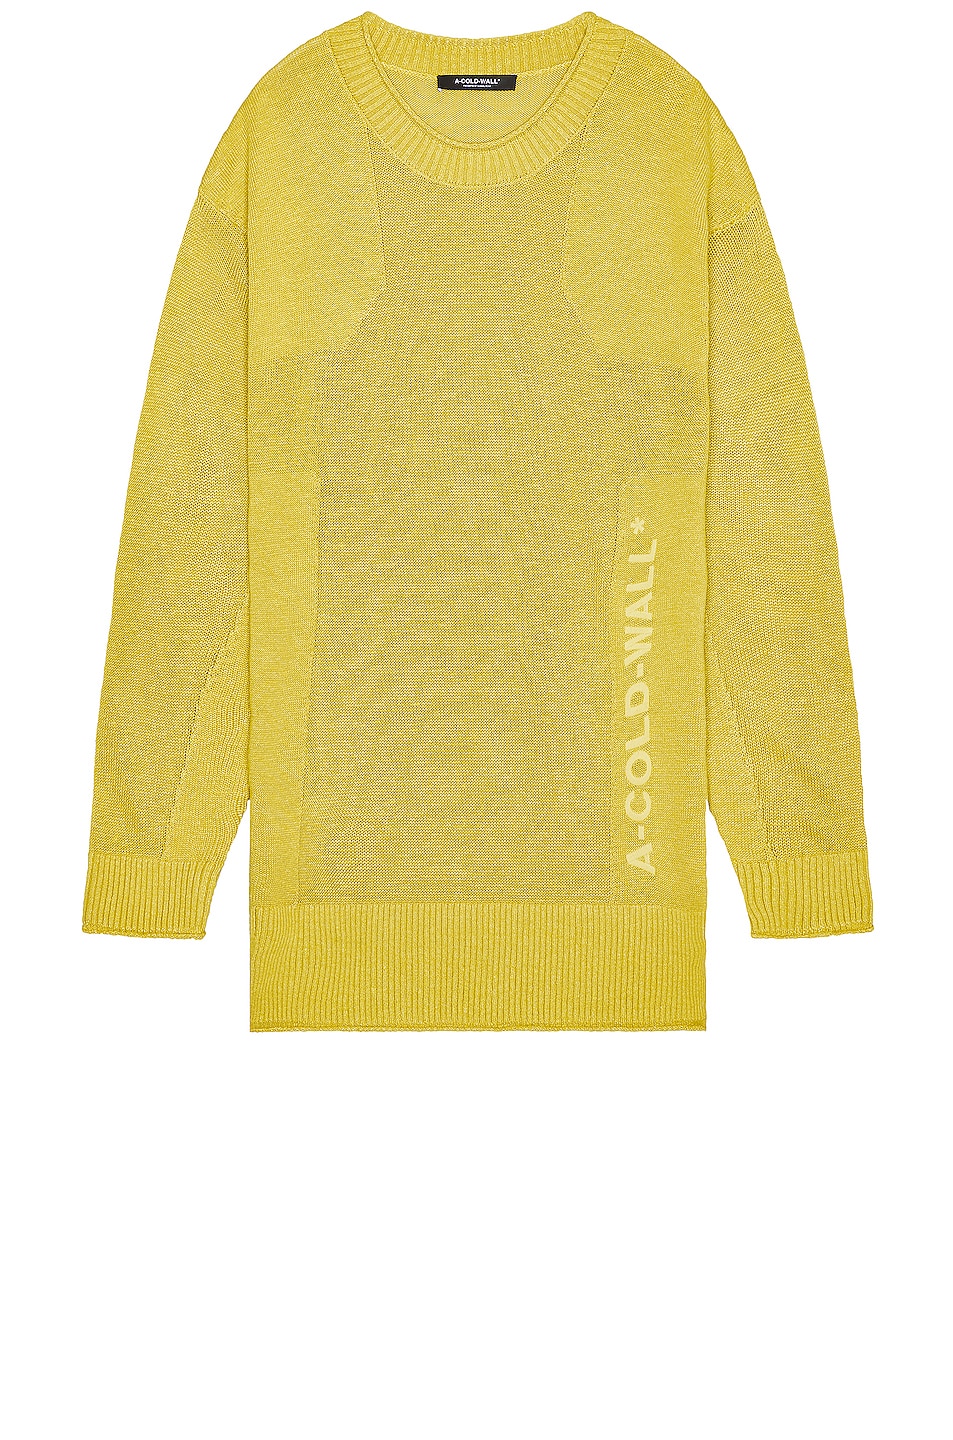 Image 1 of A-COLD-WALL* Transparency Crewneck in Cadmium